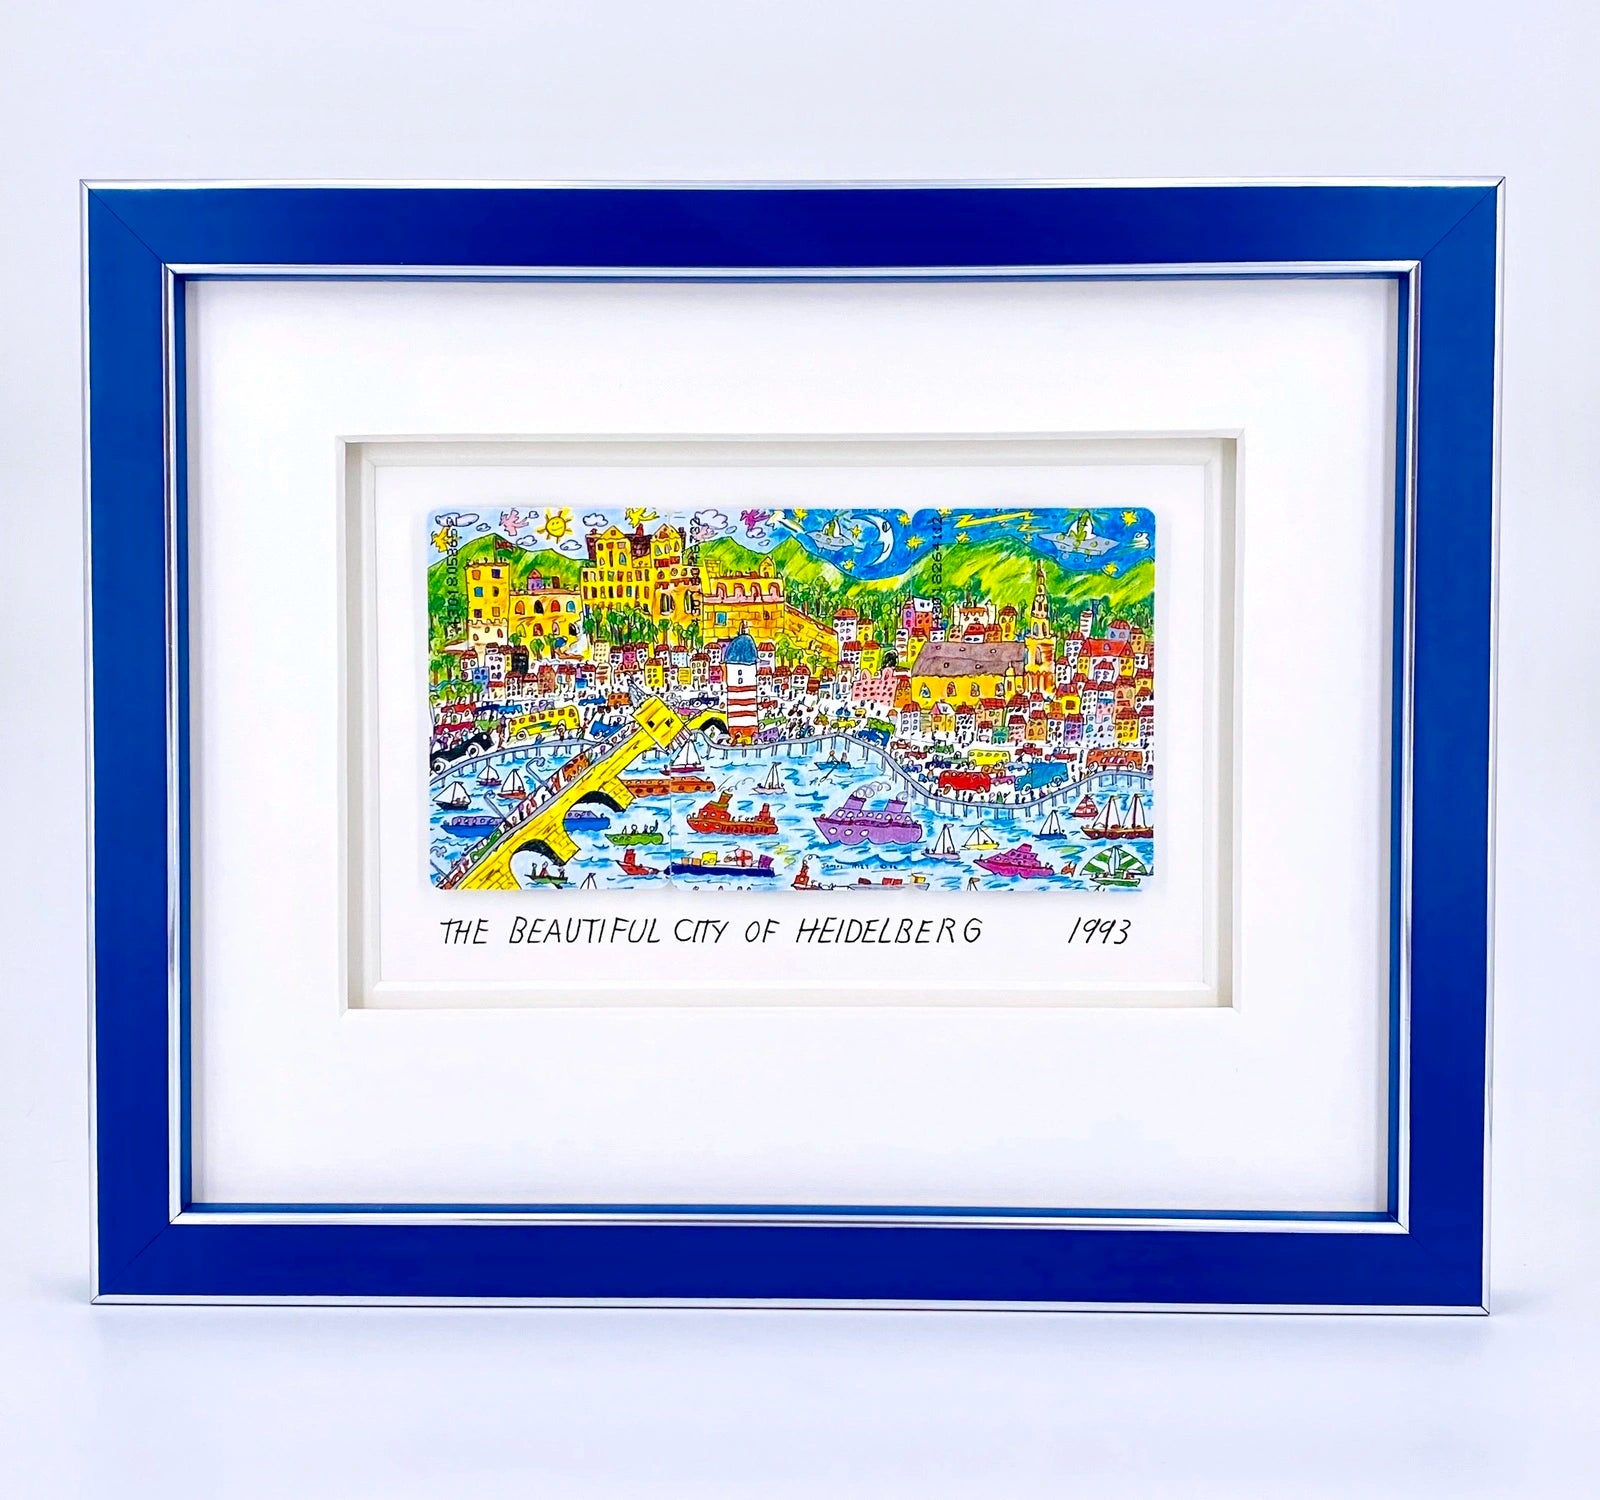 Original James Rizzi The beautiful city of Heidelberg framed with museum glass